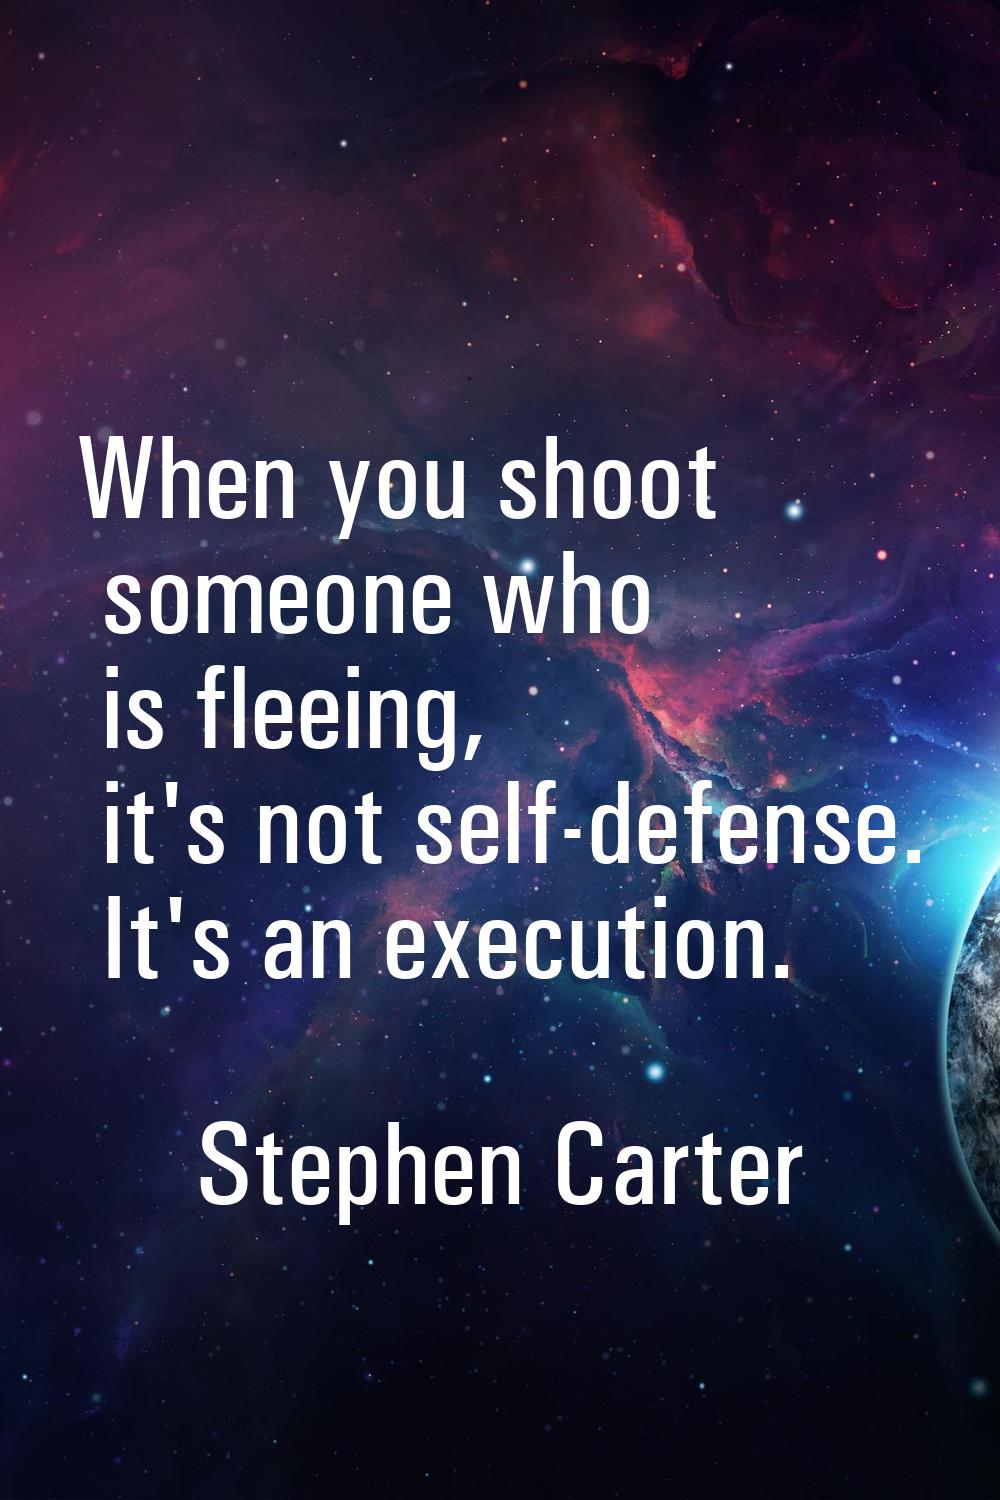 When you shoot someone who is fleeing, it's not self-defense. It's an execution.